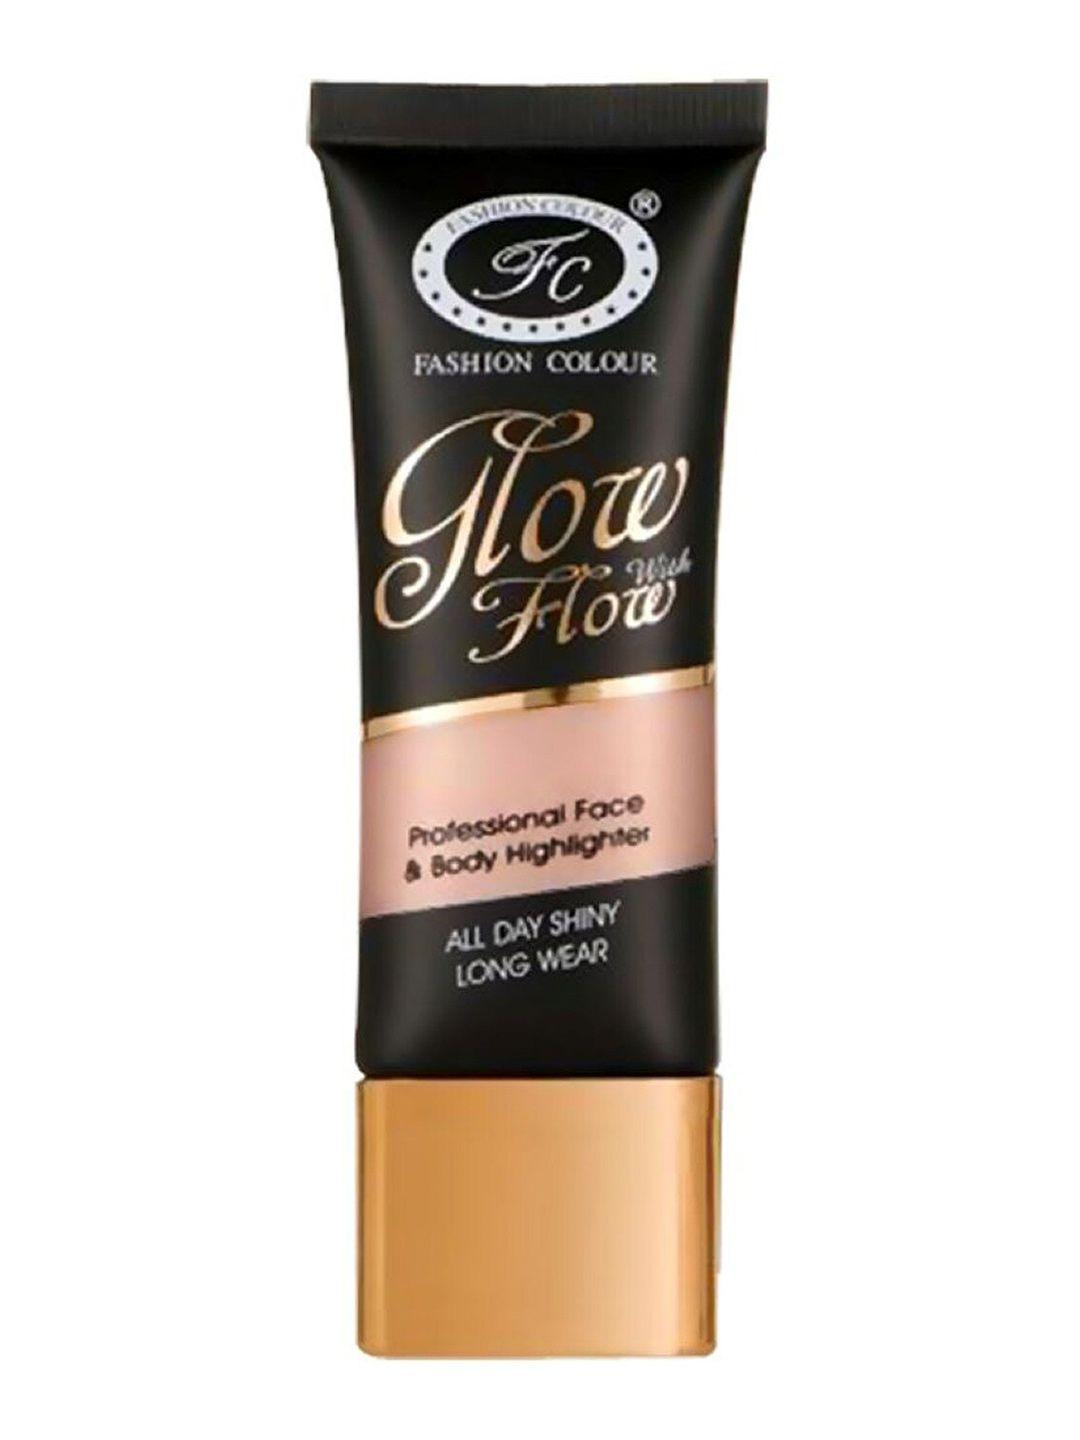 fashion colour glow with flow professional face & body highlighter 35g - shade 06